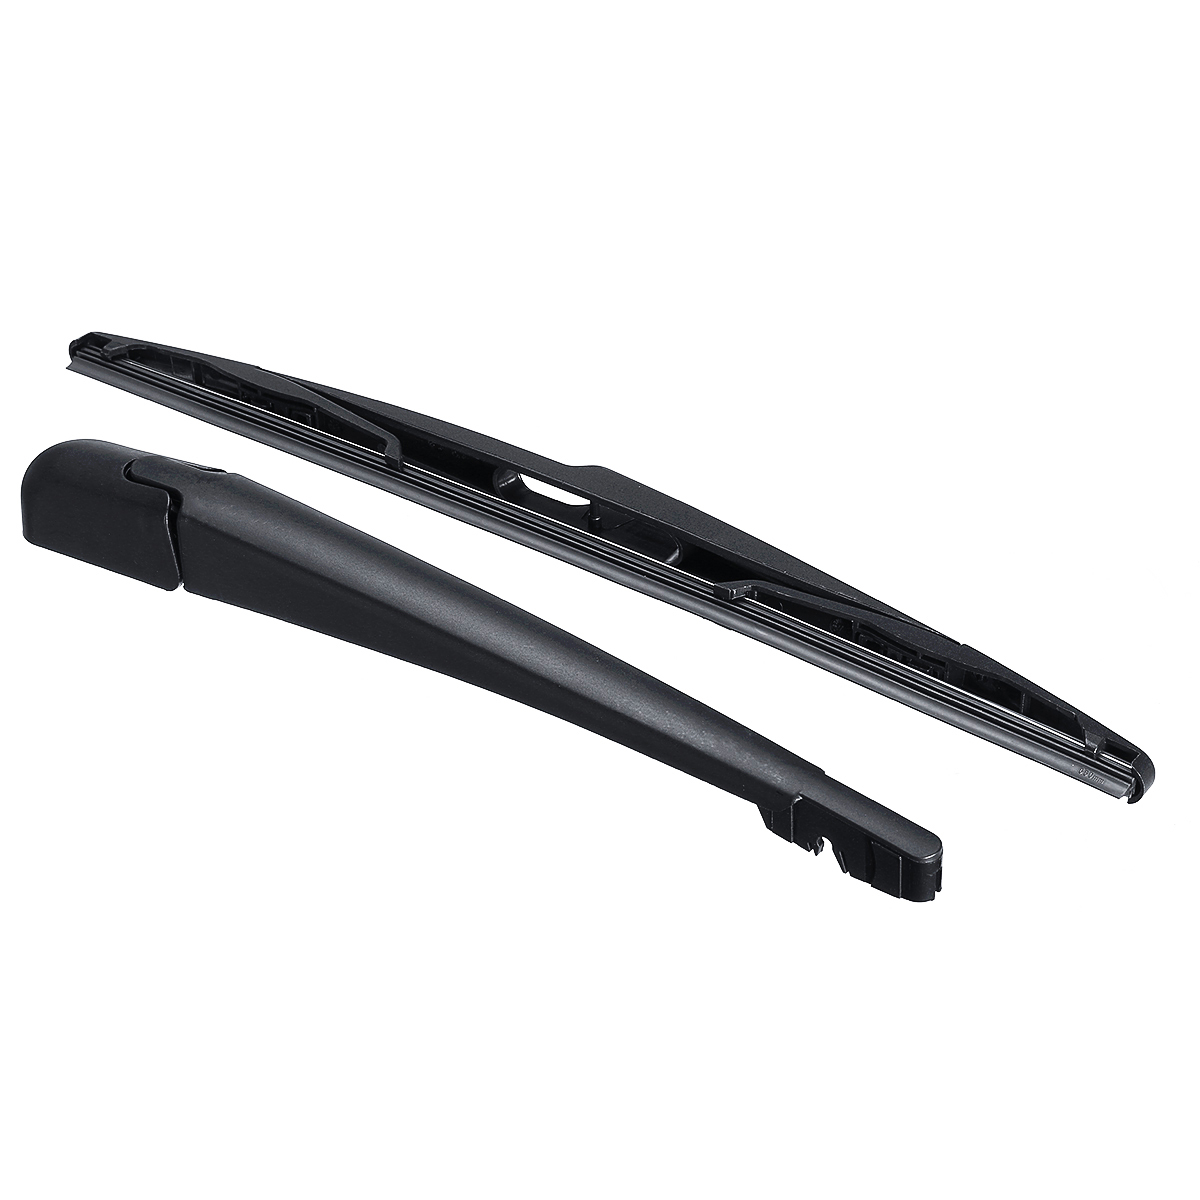 Rear Window Wiper Arm with Blade for Peugeot 307 Hatchback 2001-2008 - Auto GoShop